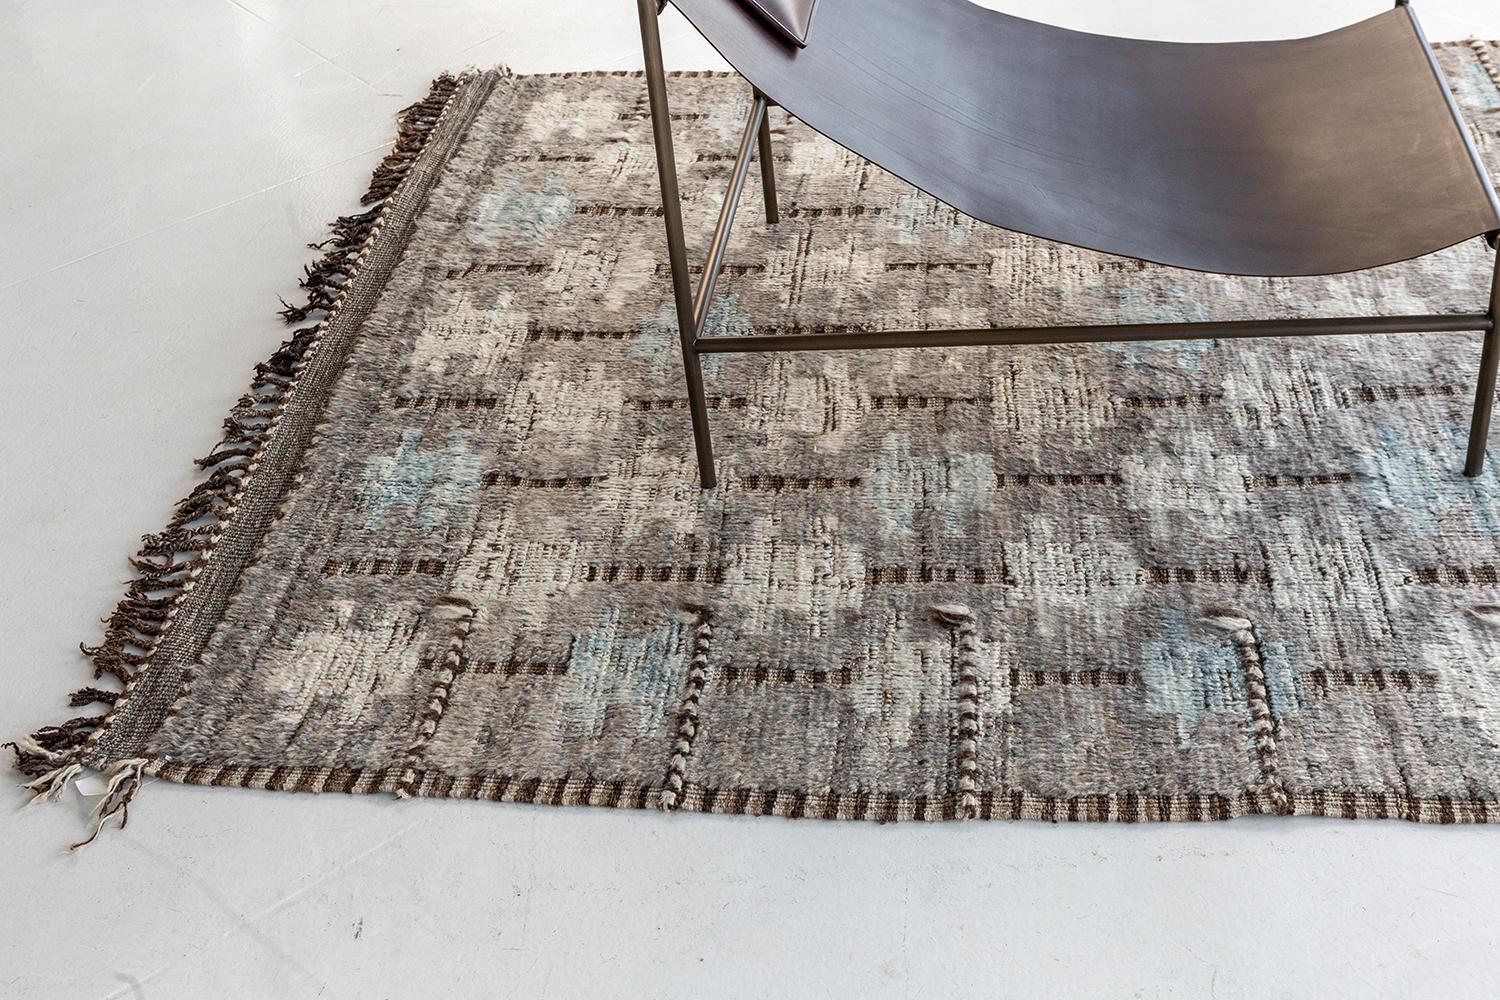 The 'Umea' rug is a handwoven wool piece inspired by vintage Scandinavian design elements and recreated for the modern design world. The rug's shag balance and harmony, handwoven with a neutral flat-weave and unique piles of taupe and orange spice.